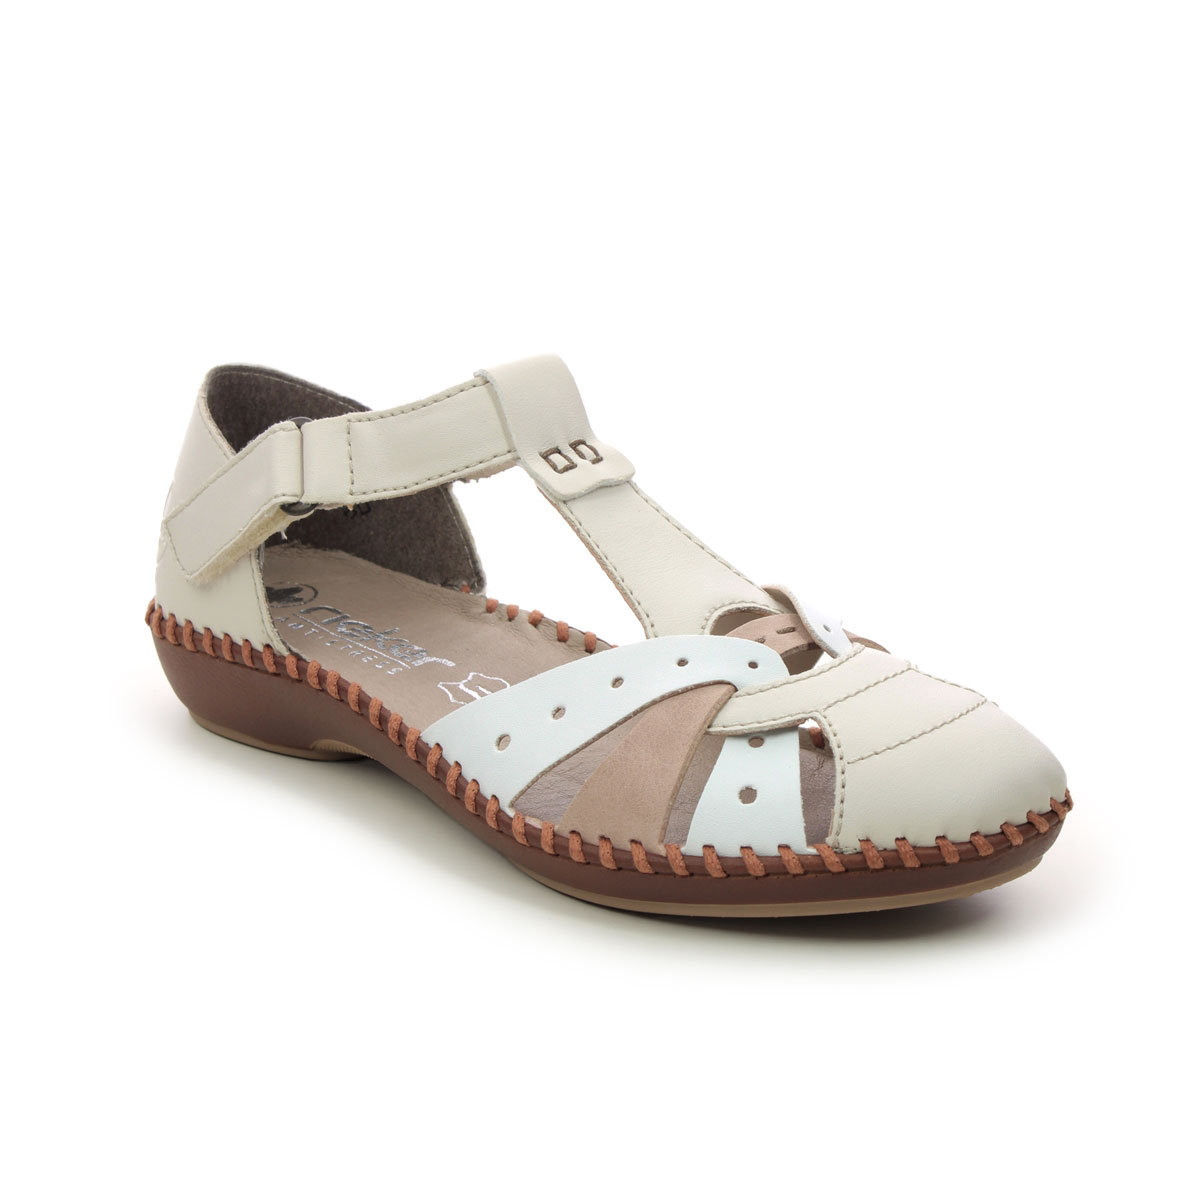 Rieker M1655-61 Off White Beige Womens Closed Toe Sandals in a Plain Leather in Size 36